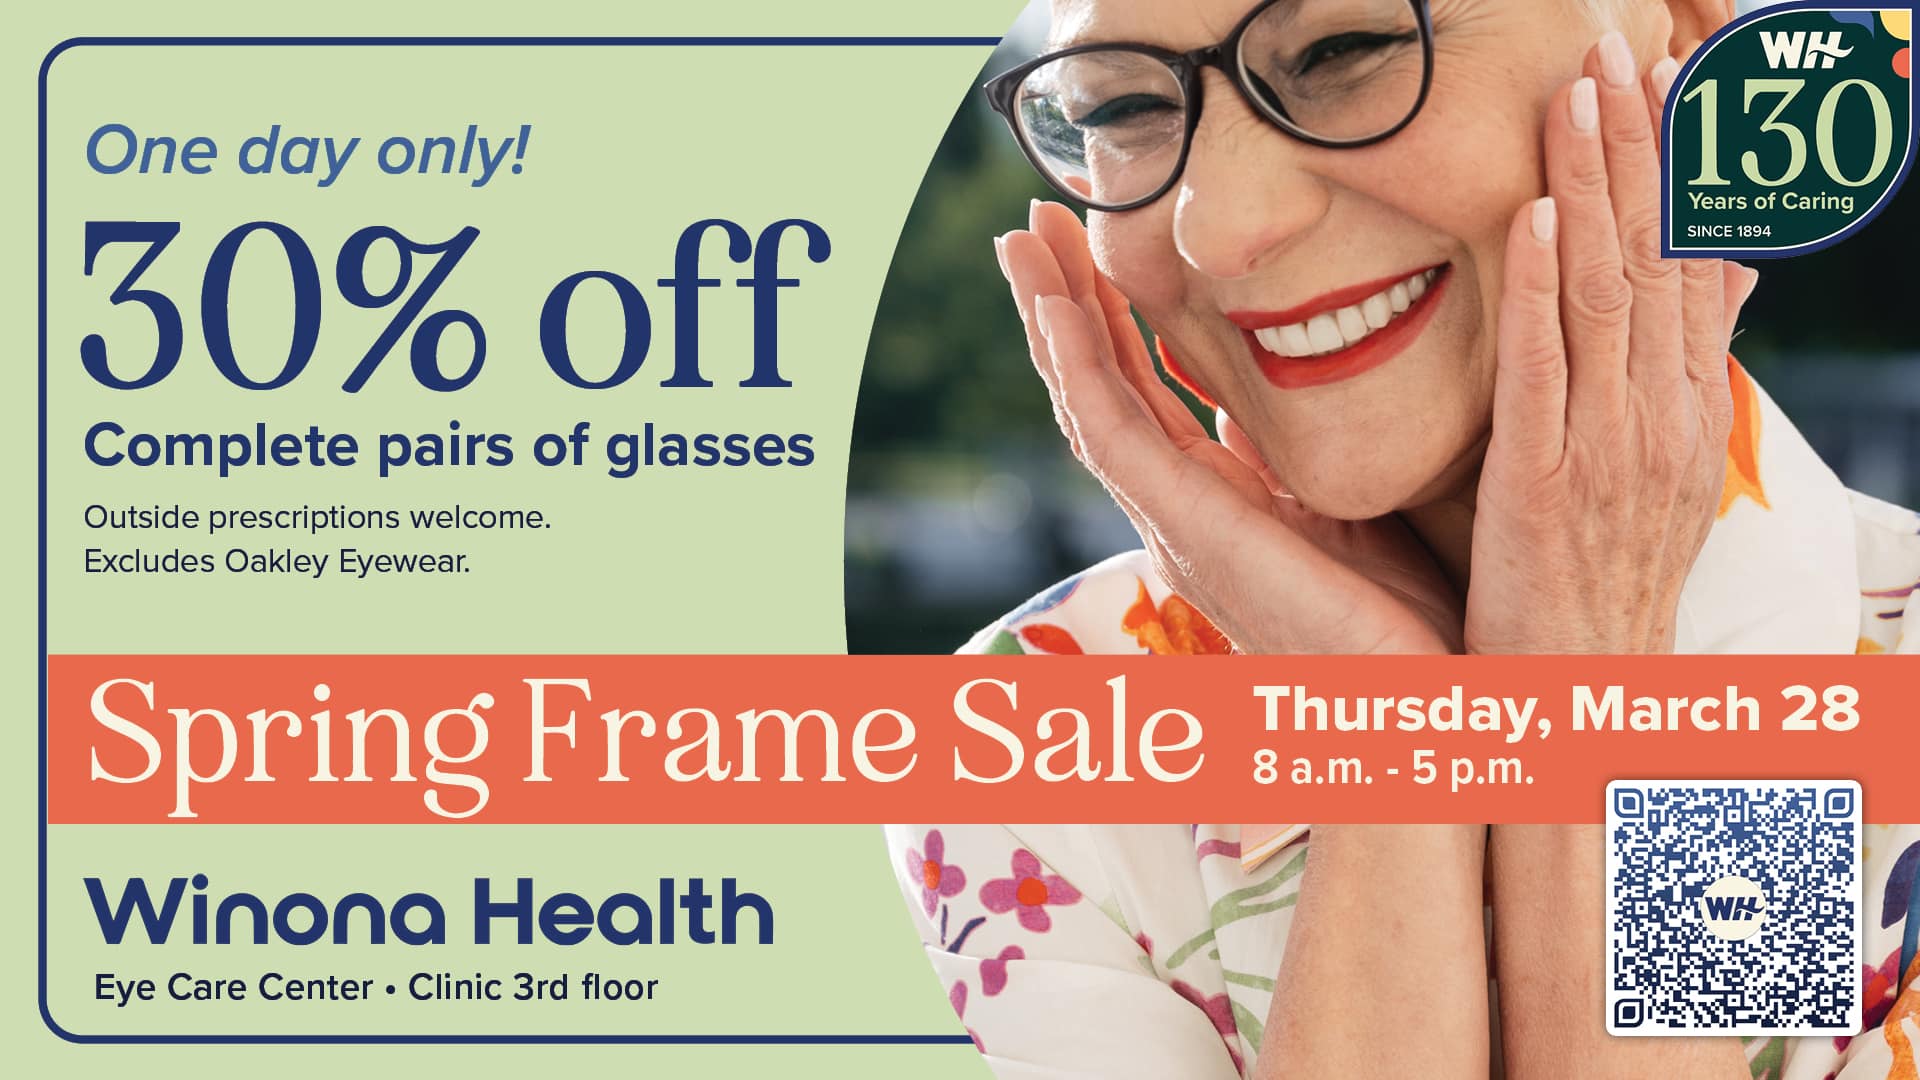 Eye Care Spring Frame Sale: One day only! Thursday, March 28.